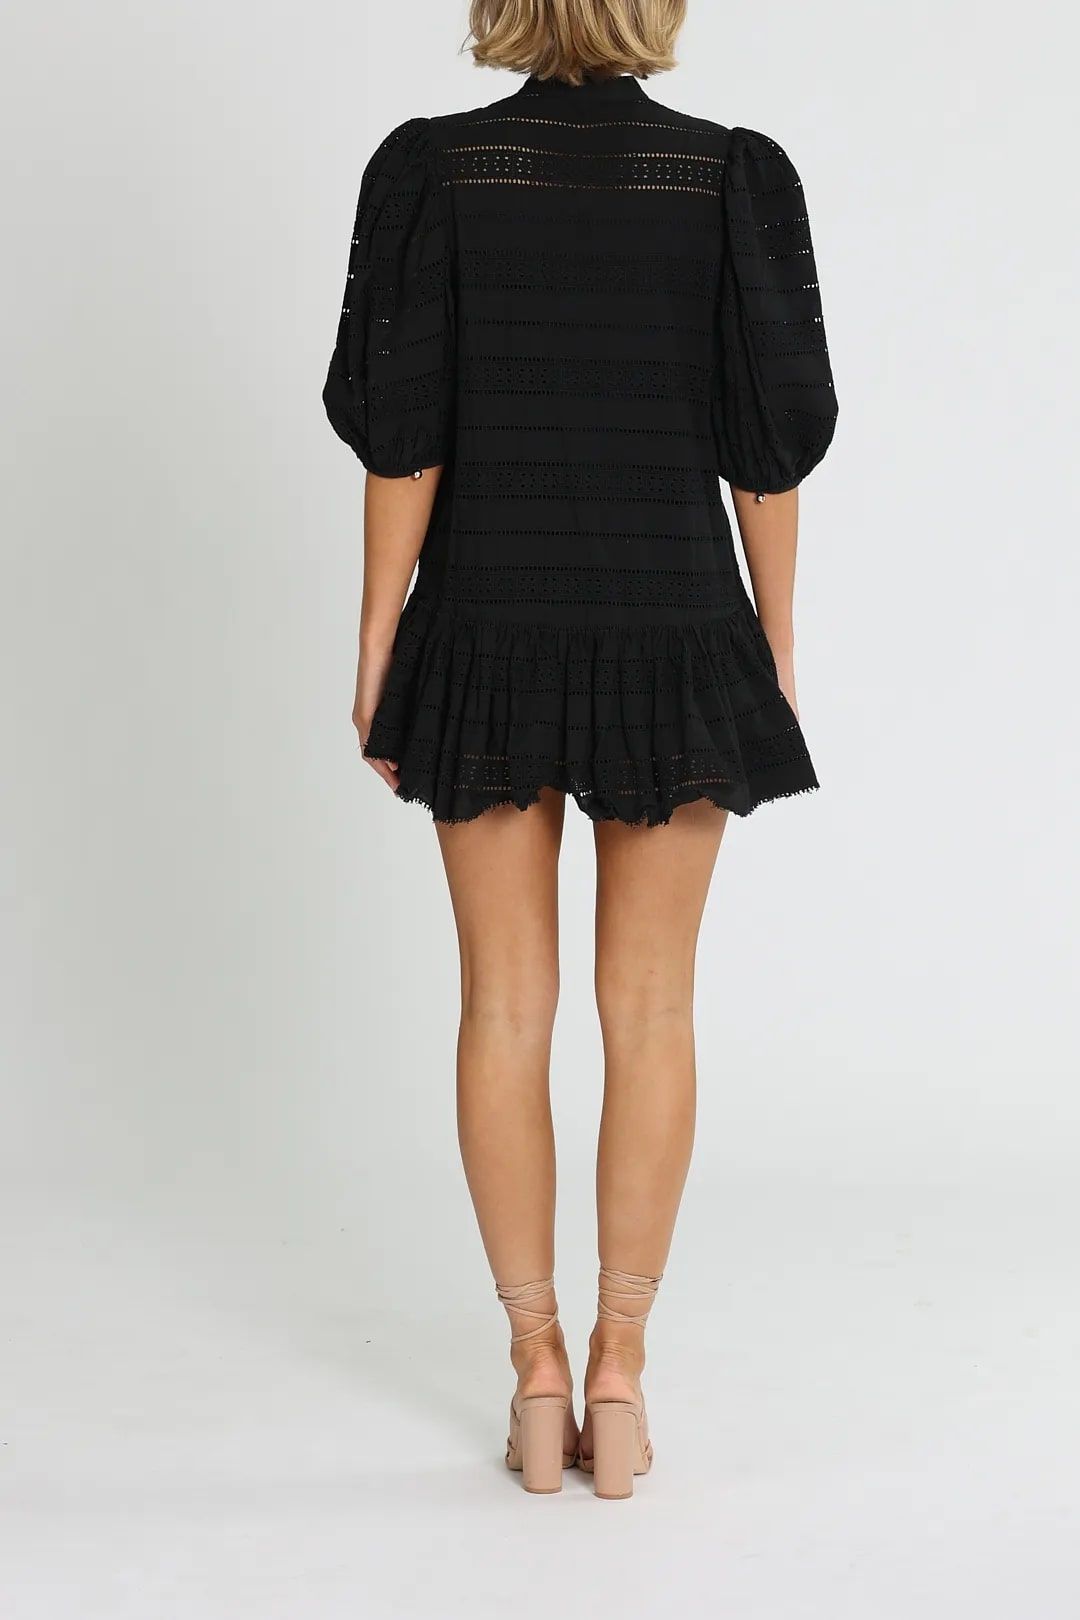 Granville dress in black for cocktail parties.